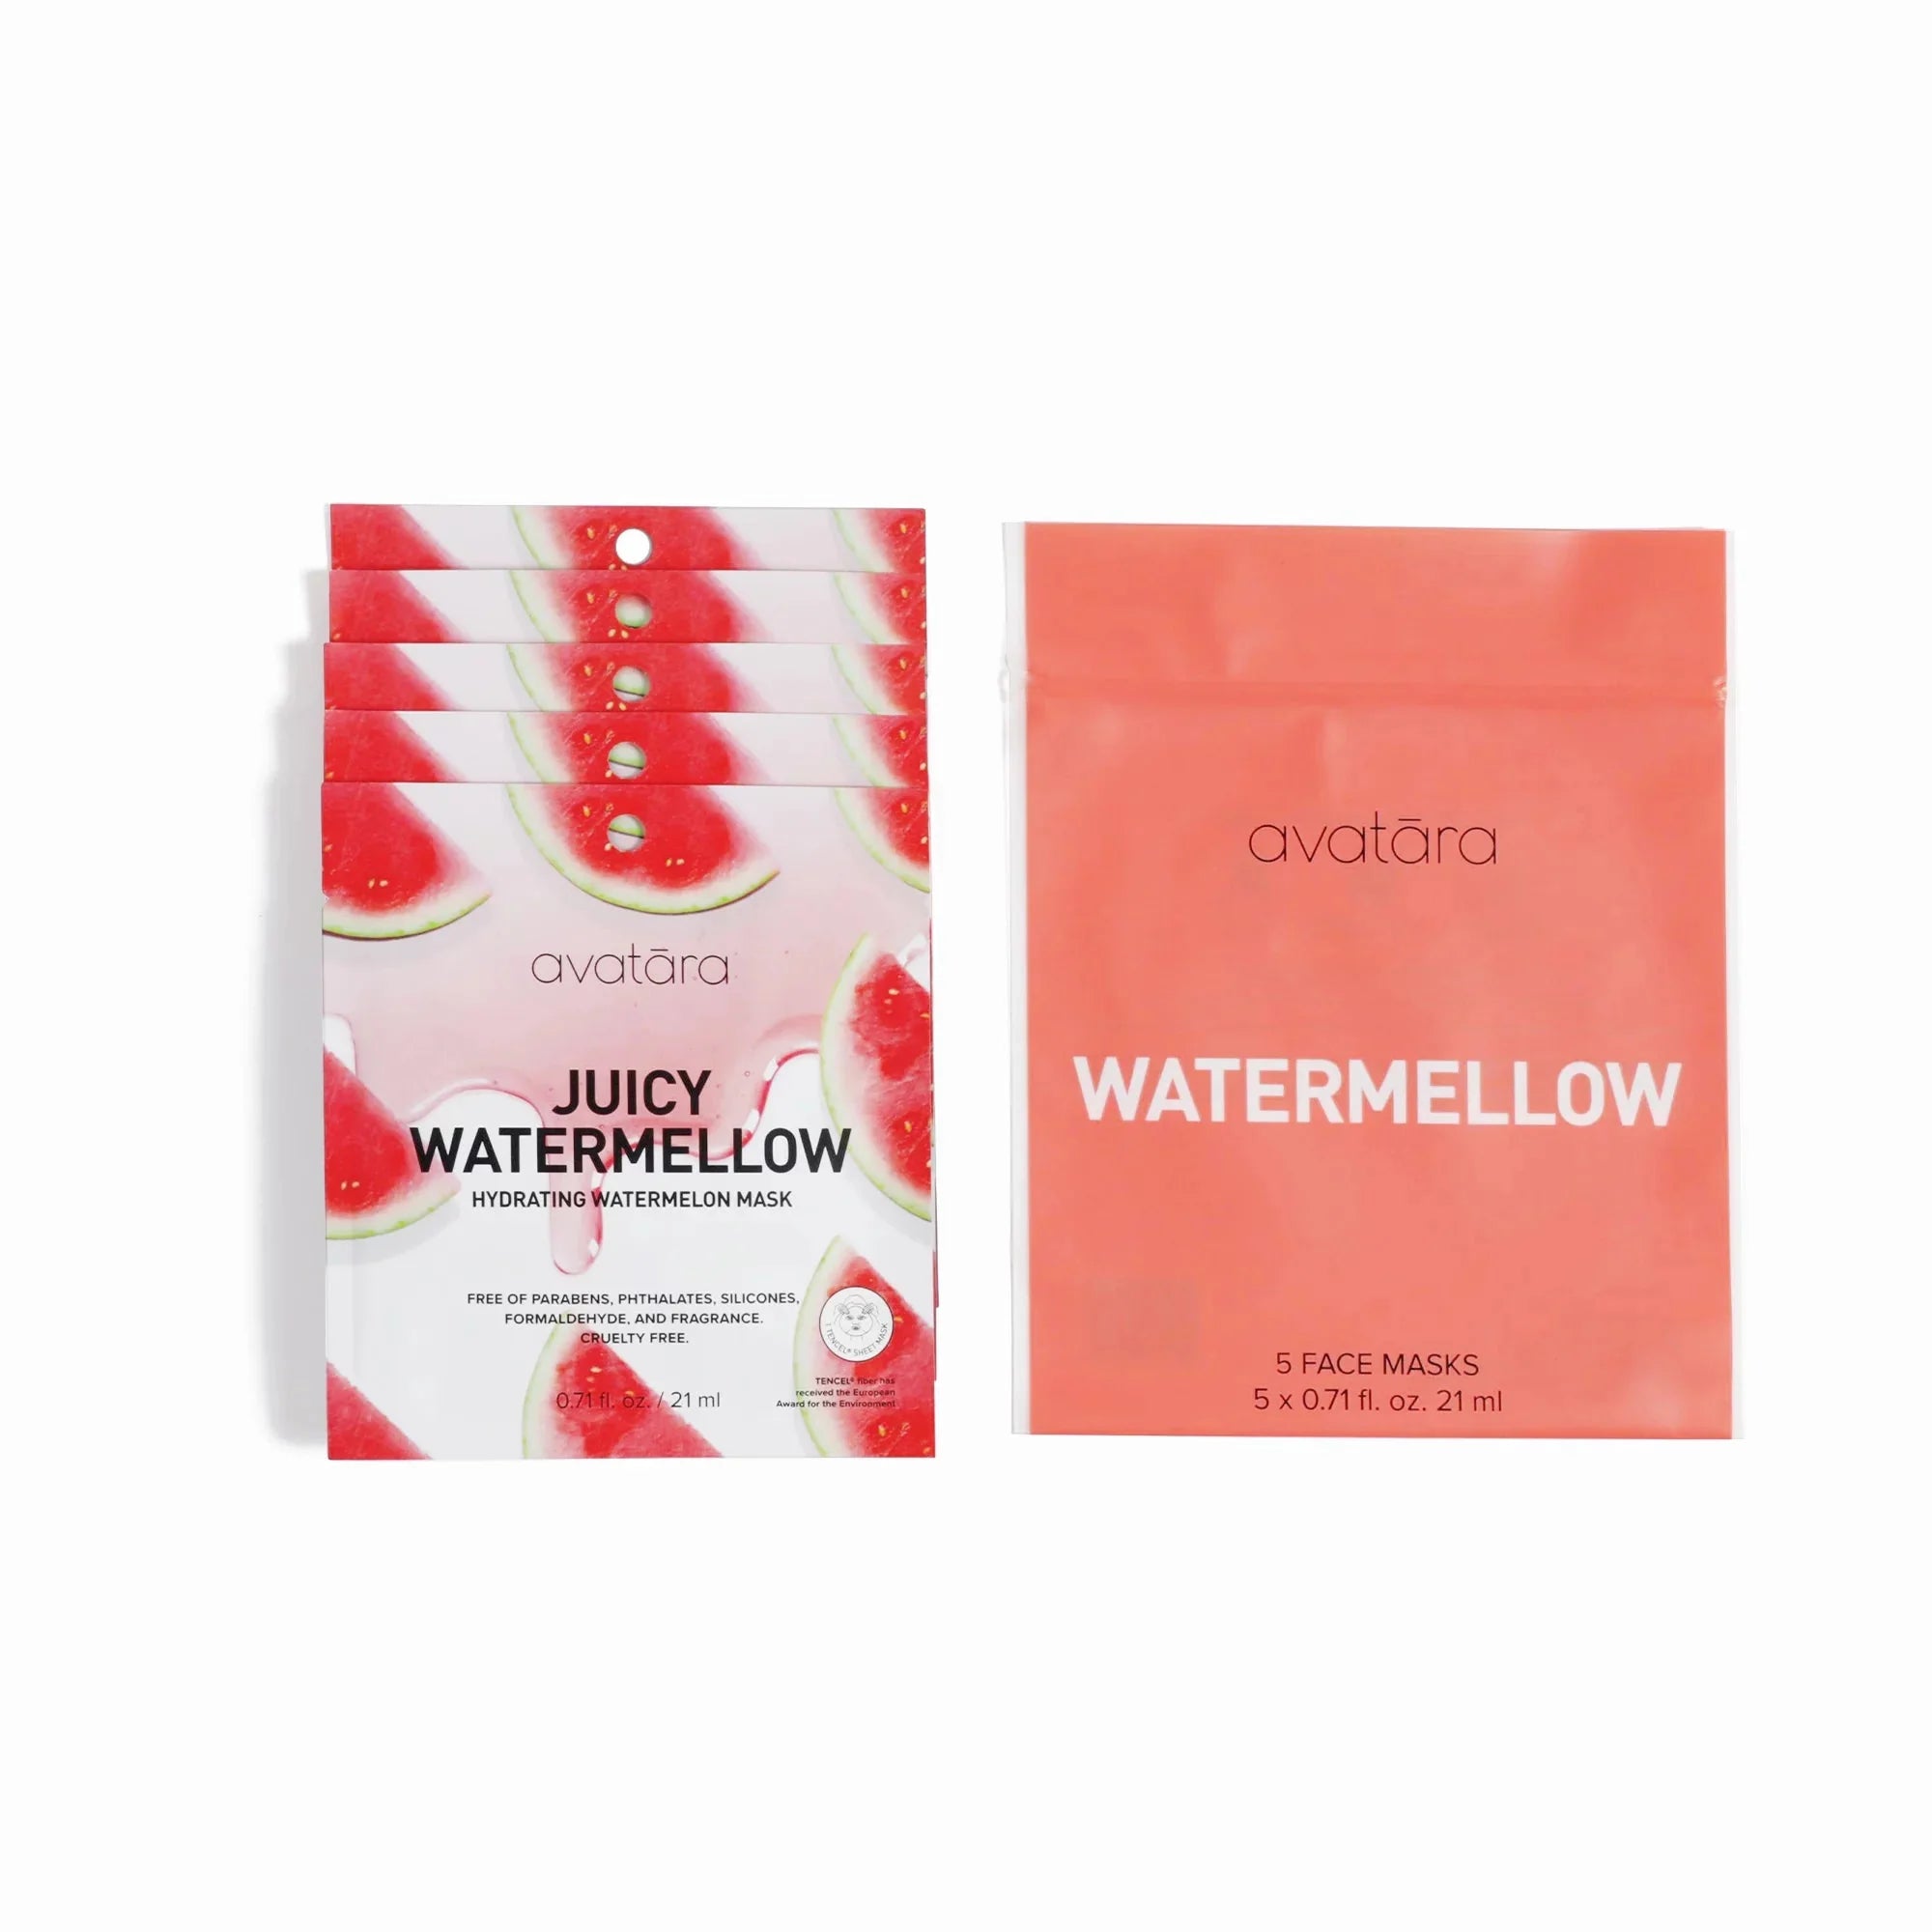 Wholesale prices with free shipping all over United States Avatara Juicy Watermellow Face Mask, 5 Pack - Steven Deals